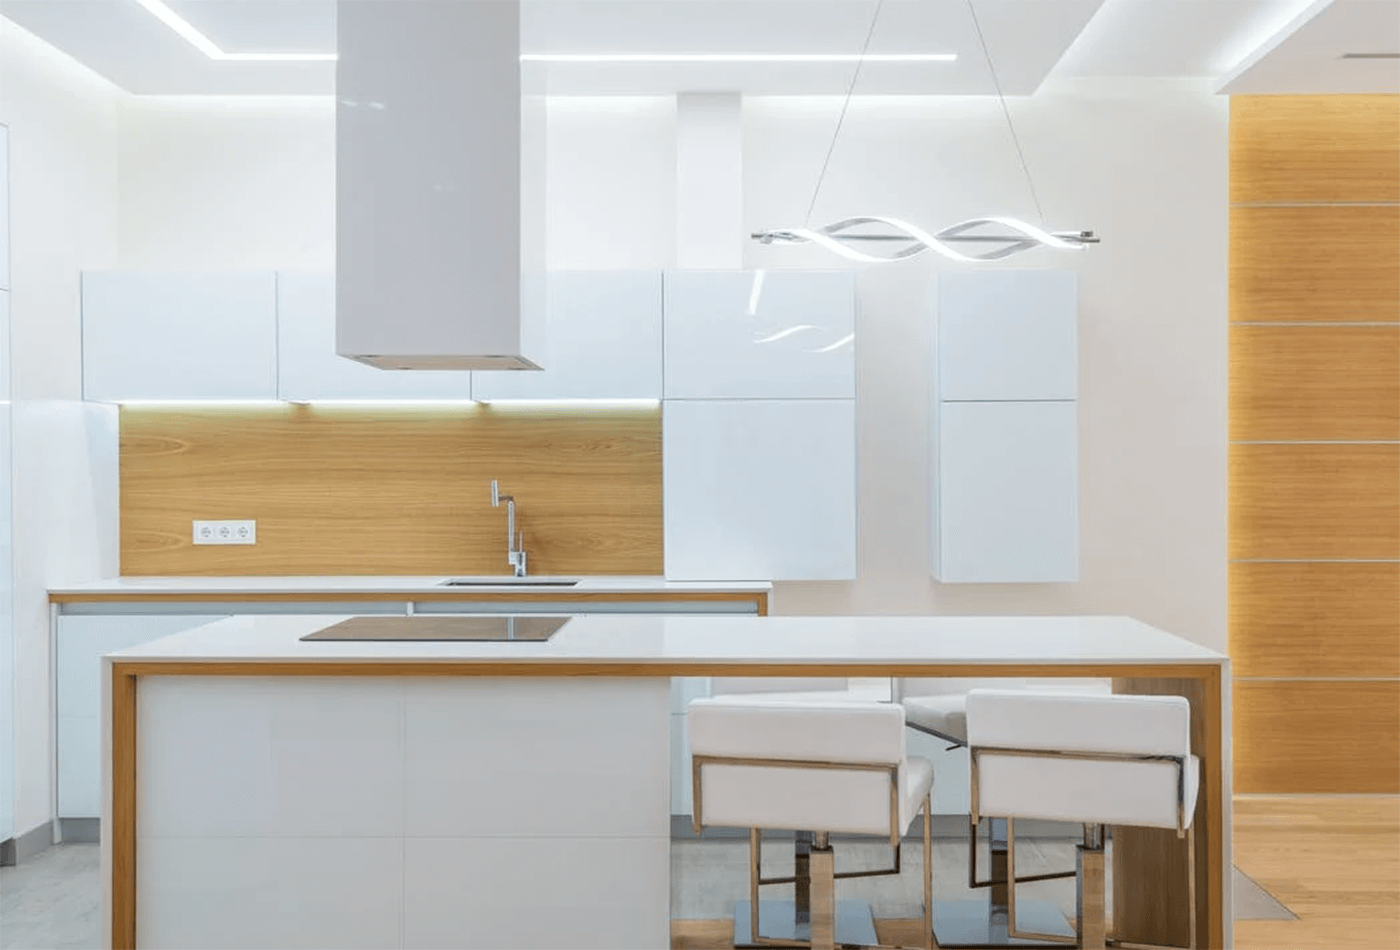 Overlay Worktop For Kitchens: Advantages And Disadvantages